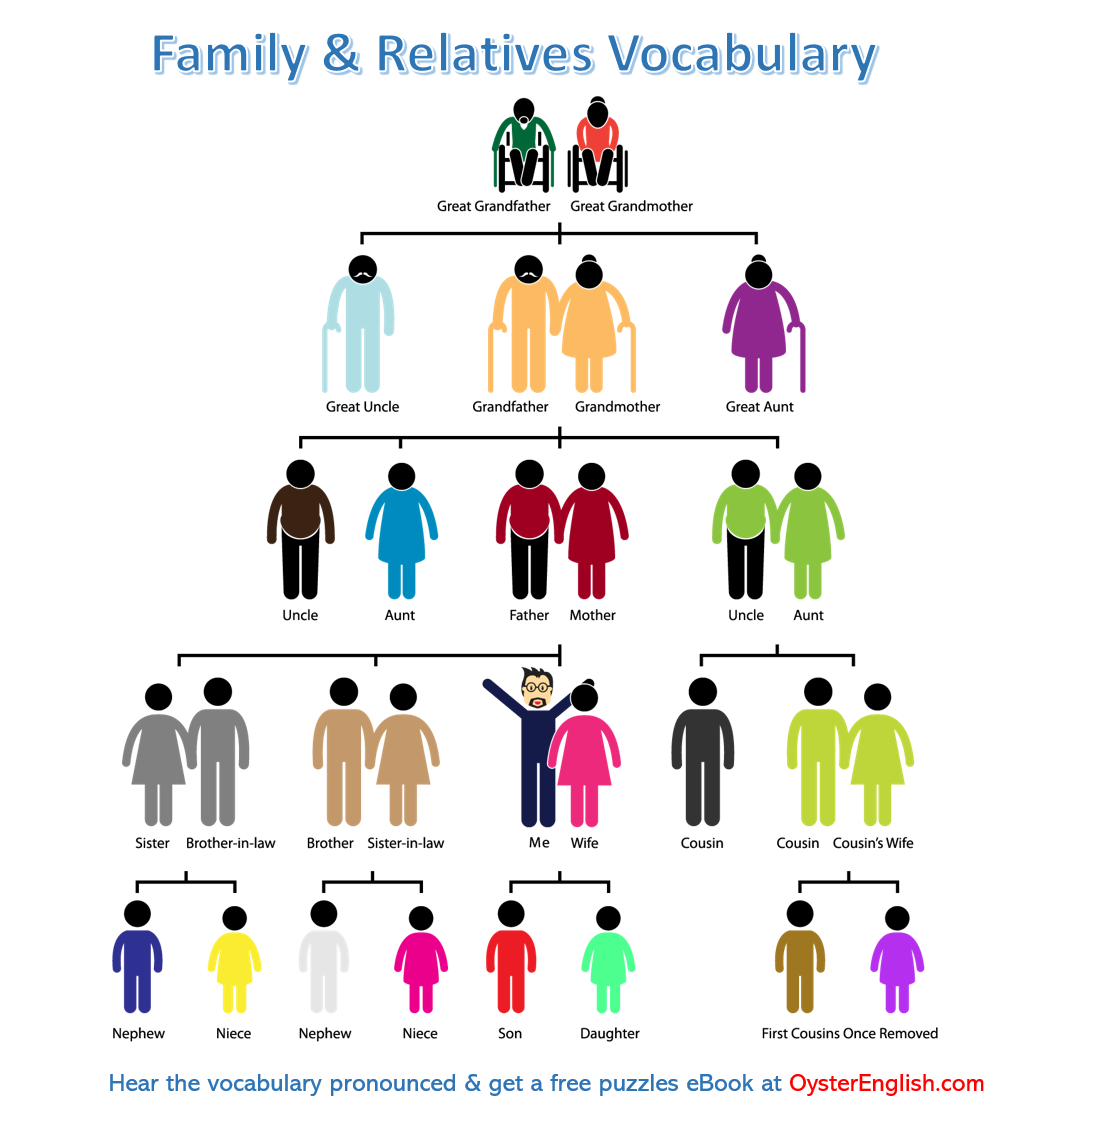 Family Vocabulary. Family Vocabulary английский. A member of the Family. Семья in English. Related vocabulary